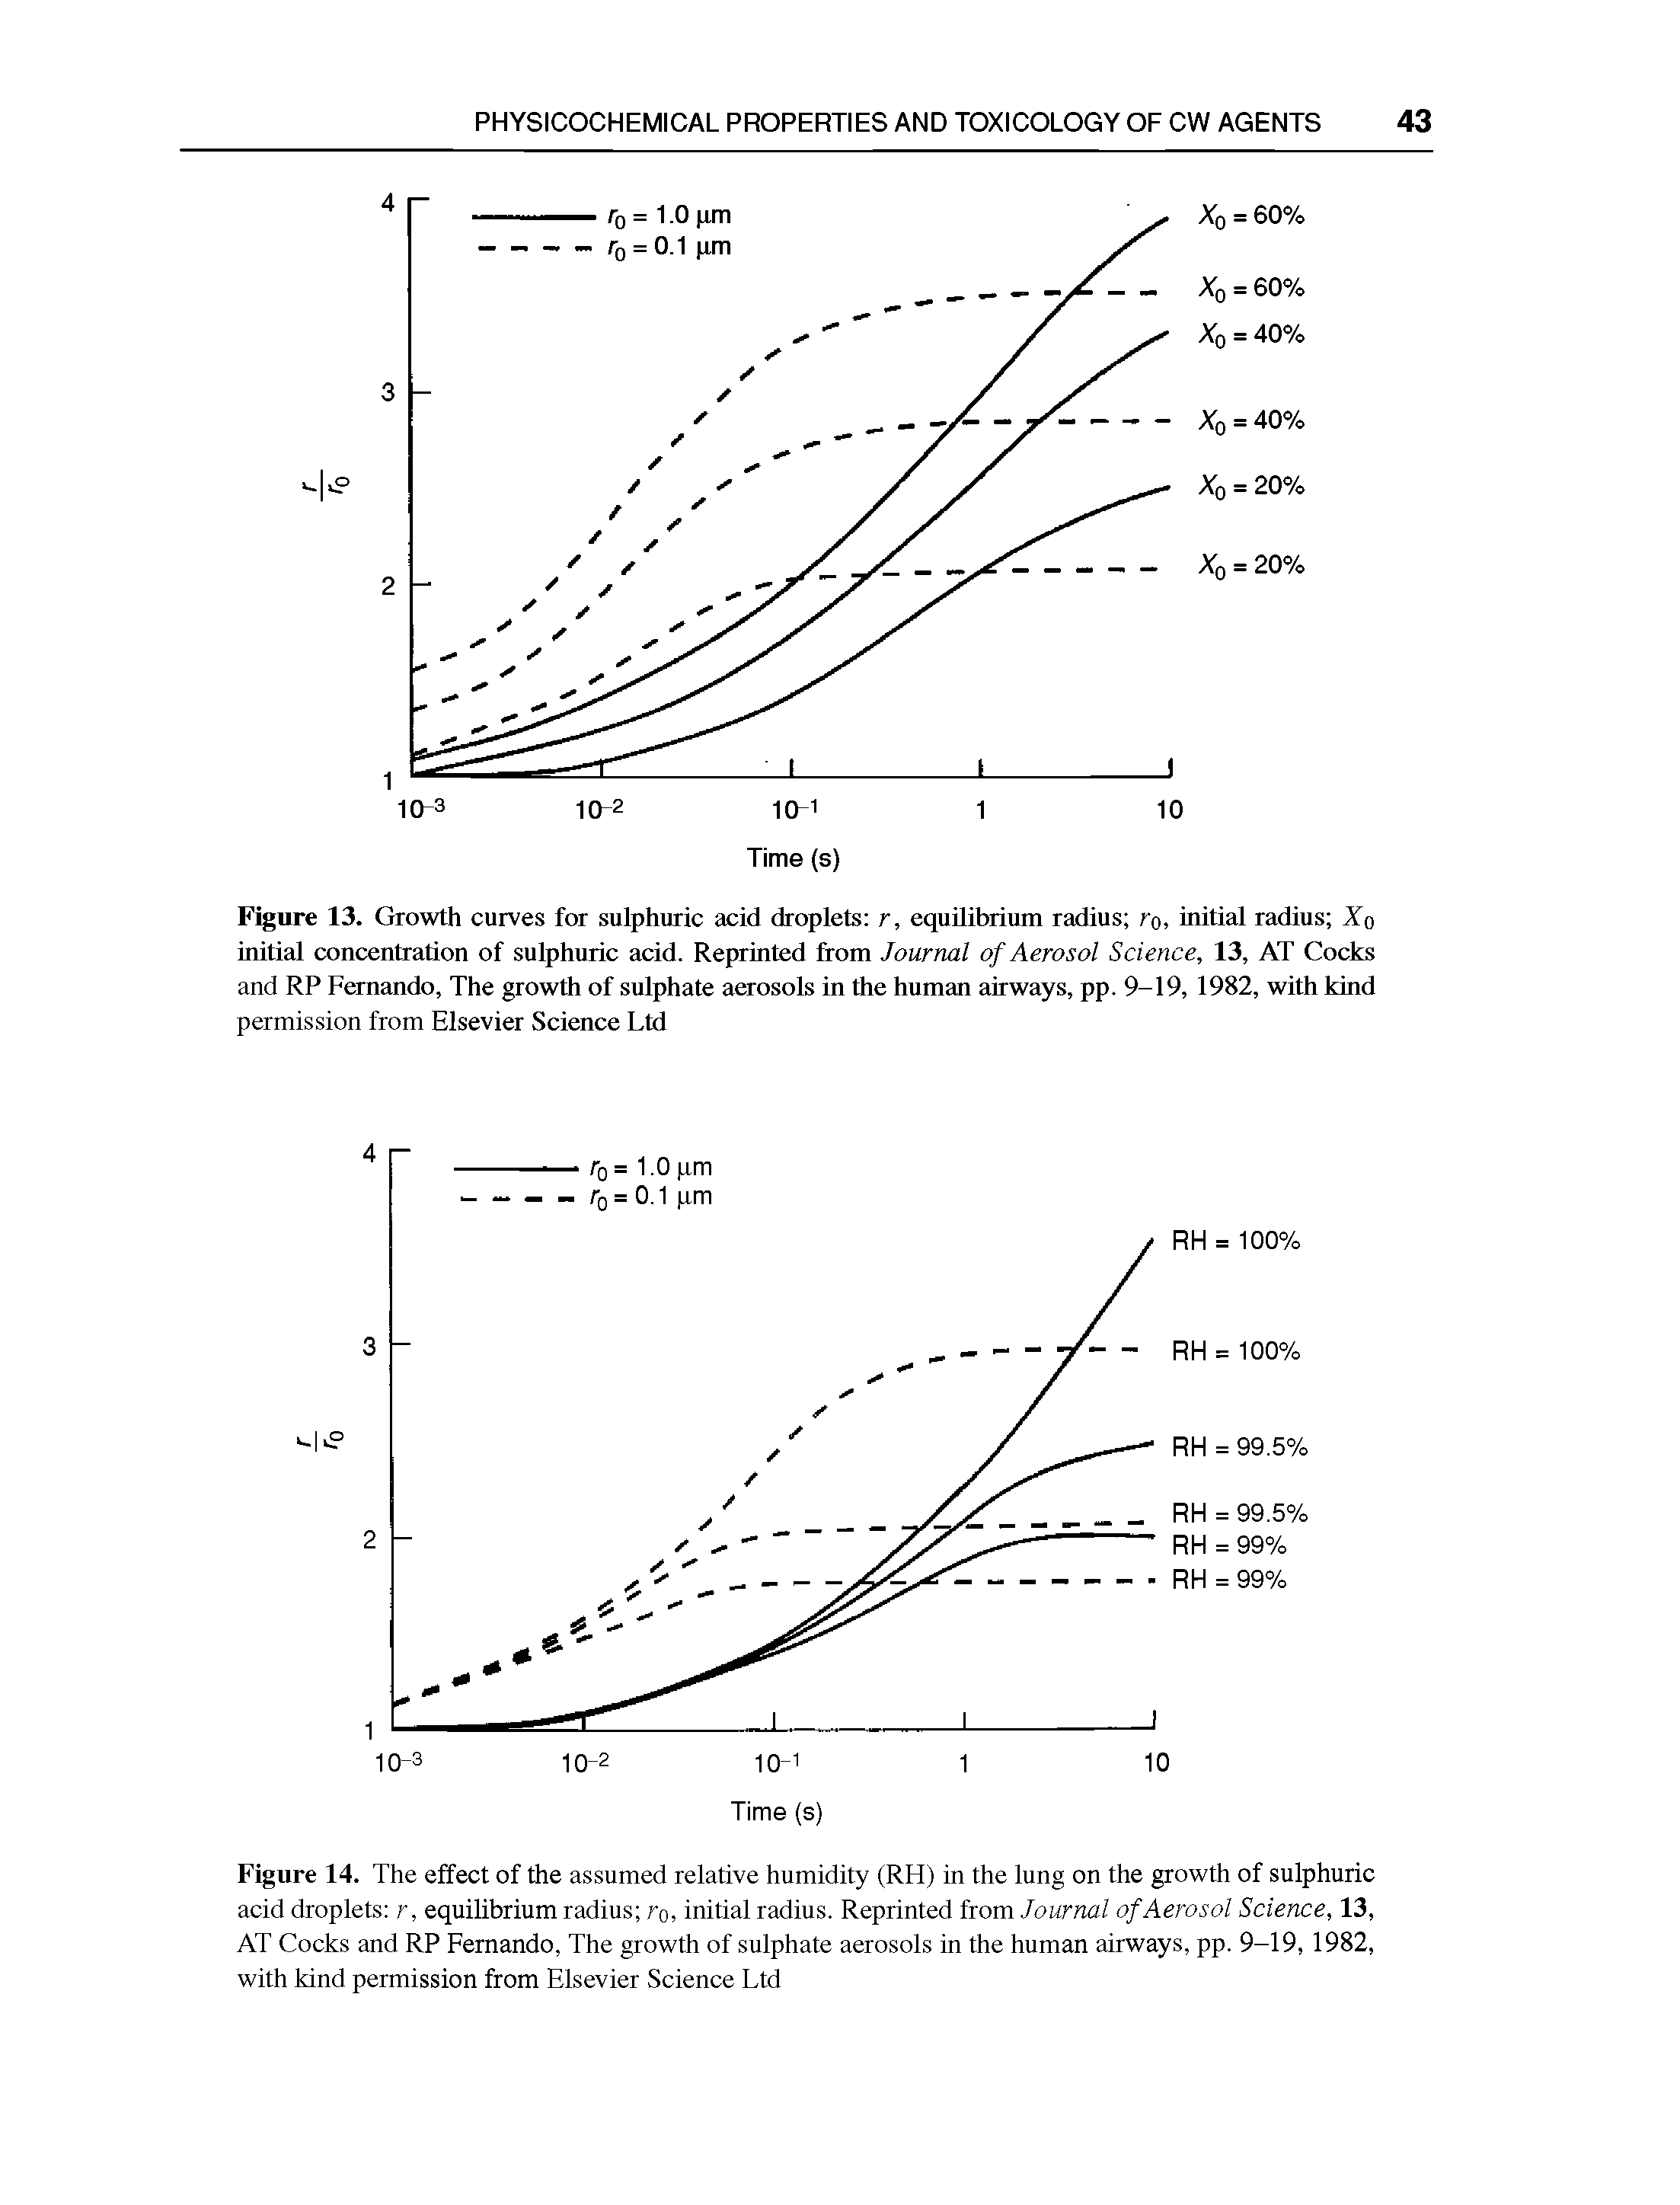 Figure 13. Growth curves for sulphuric acid droplets r, equilibrium radius ro, initial radius X0 initial concentration of sulphuric acid. Reprinted from Journal of Aerosol Science, 13, AT Cocks and RP Fernando, The growth of sulphate aerosols in the human airways, pp. 9-19, 1982, with kind permission from Elsevier Science Ltd...